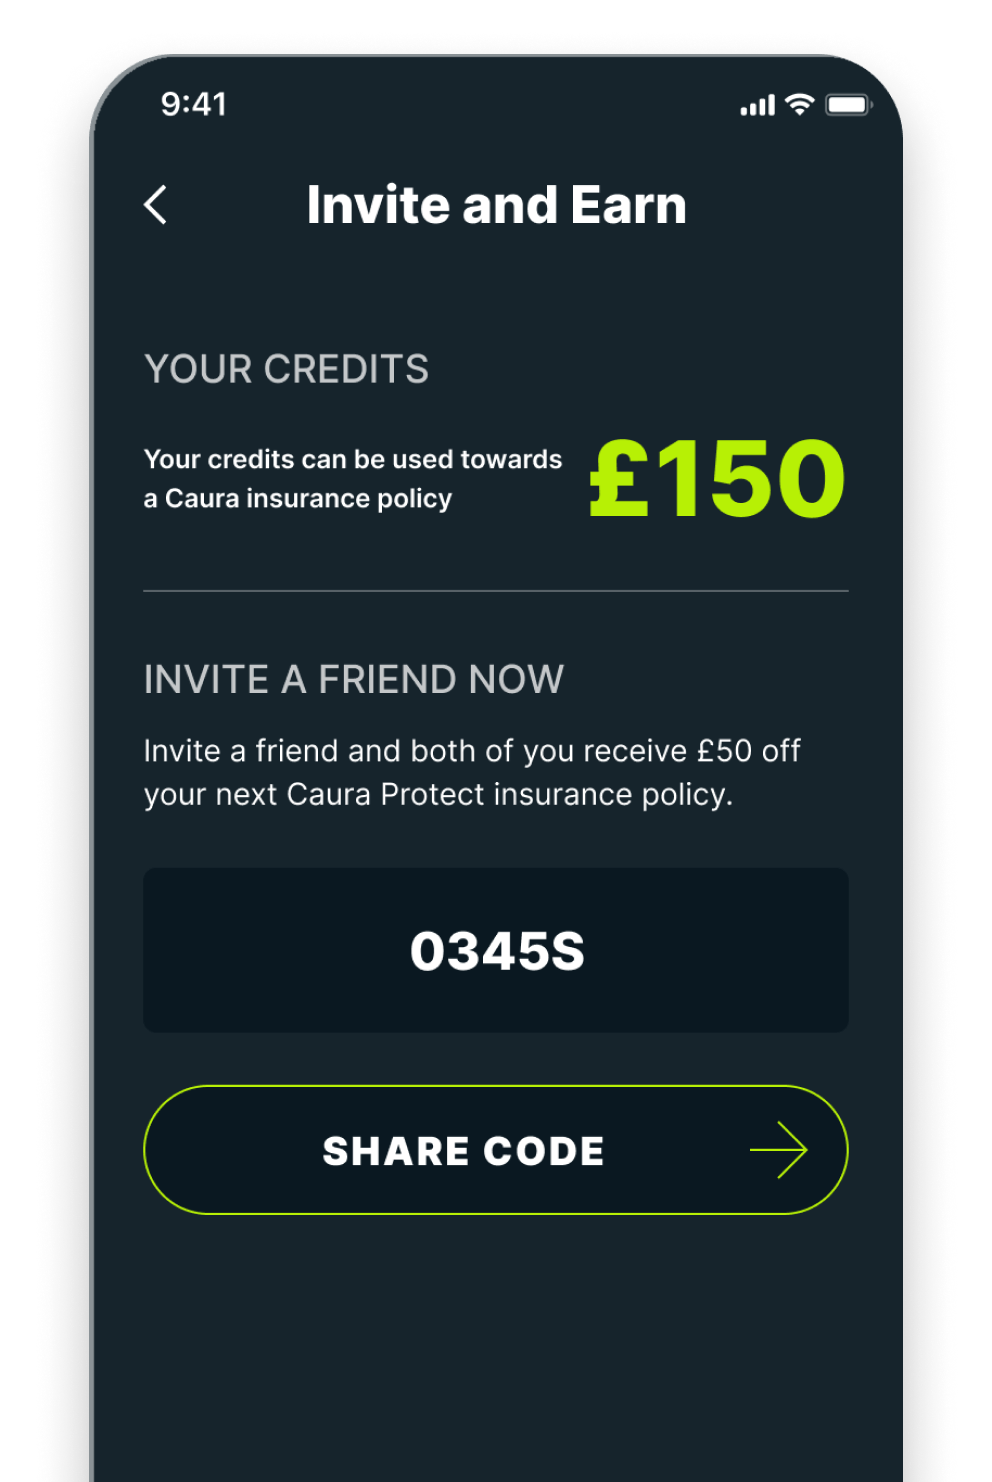 The Invite screen on Caura's mobile app, where you can invite friends to earn £50!